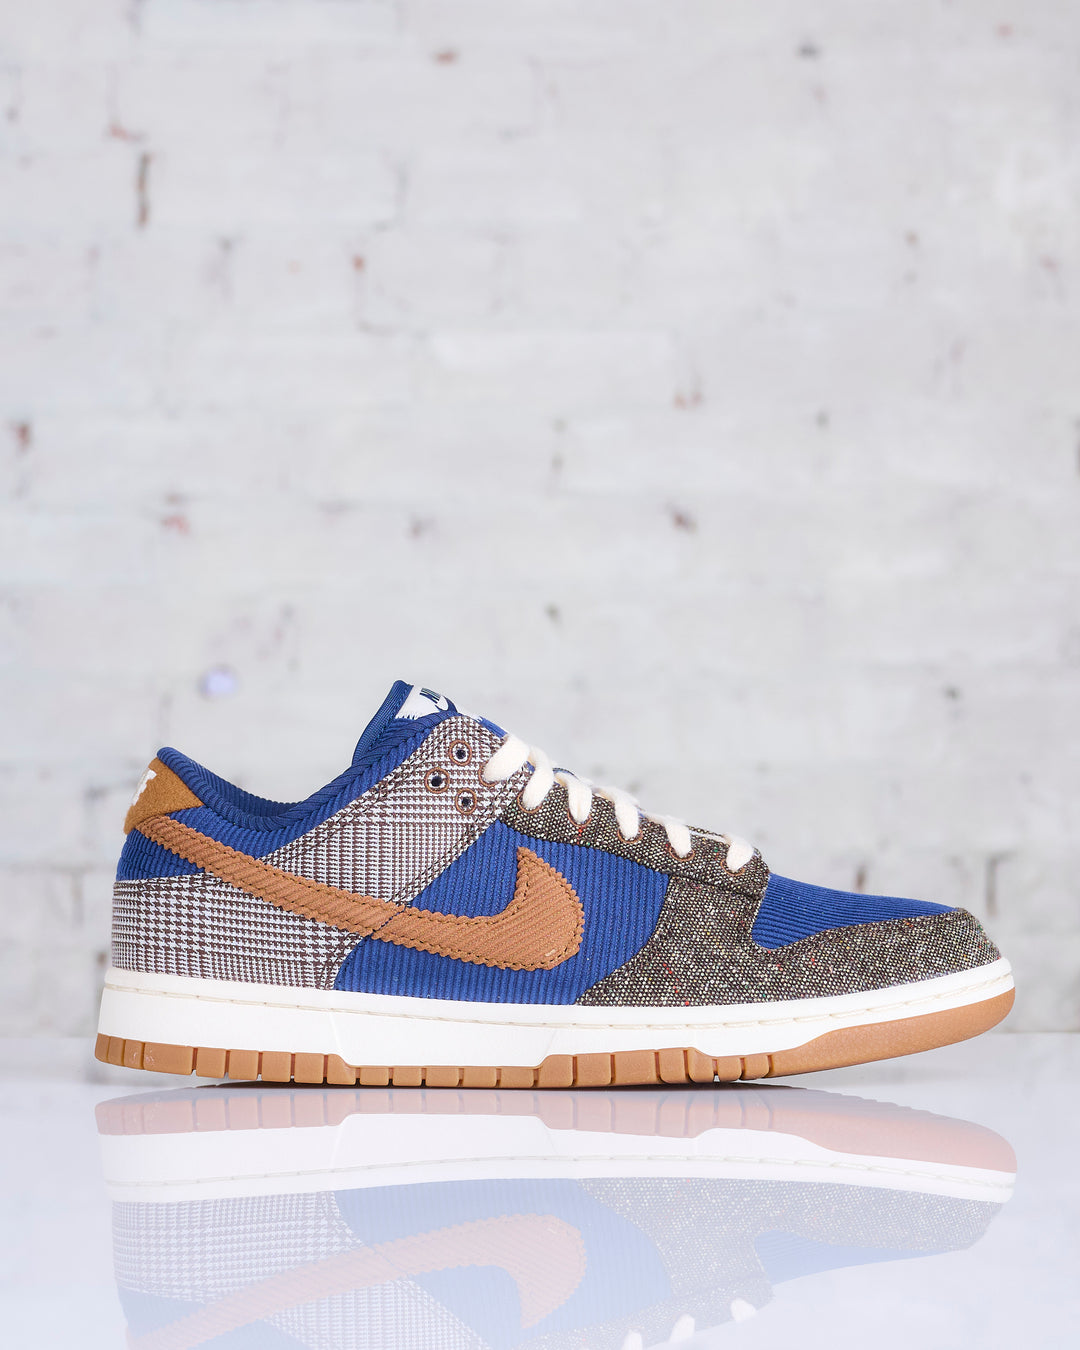 Dunk Low Premium Midnight Navy / Ale Brown-Pale Ivory FQ8746 410